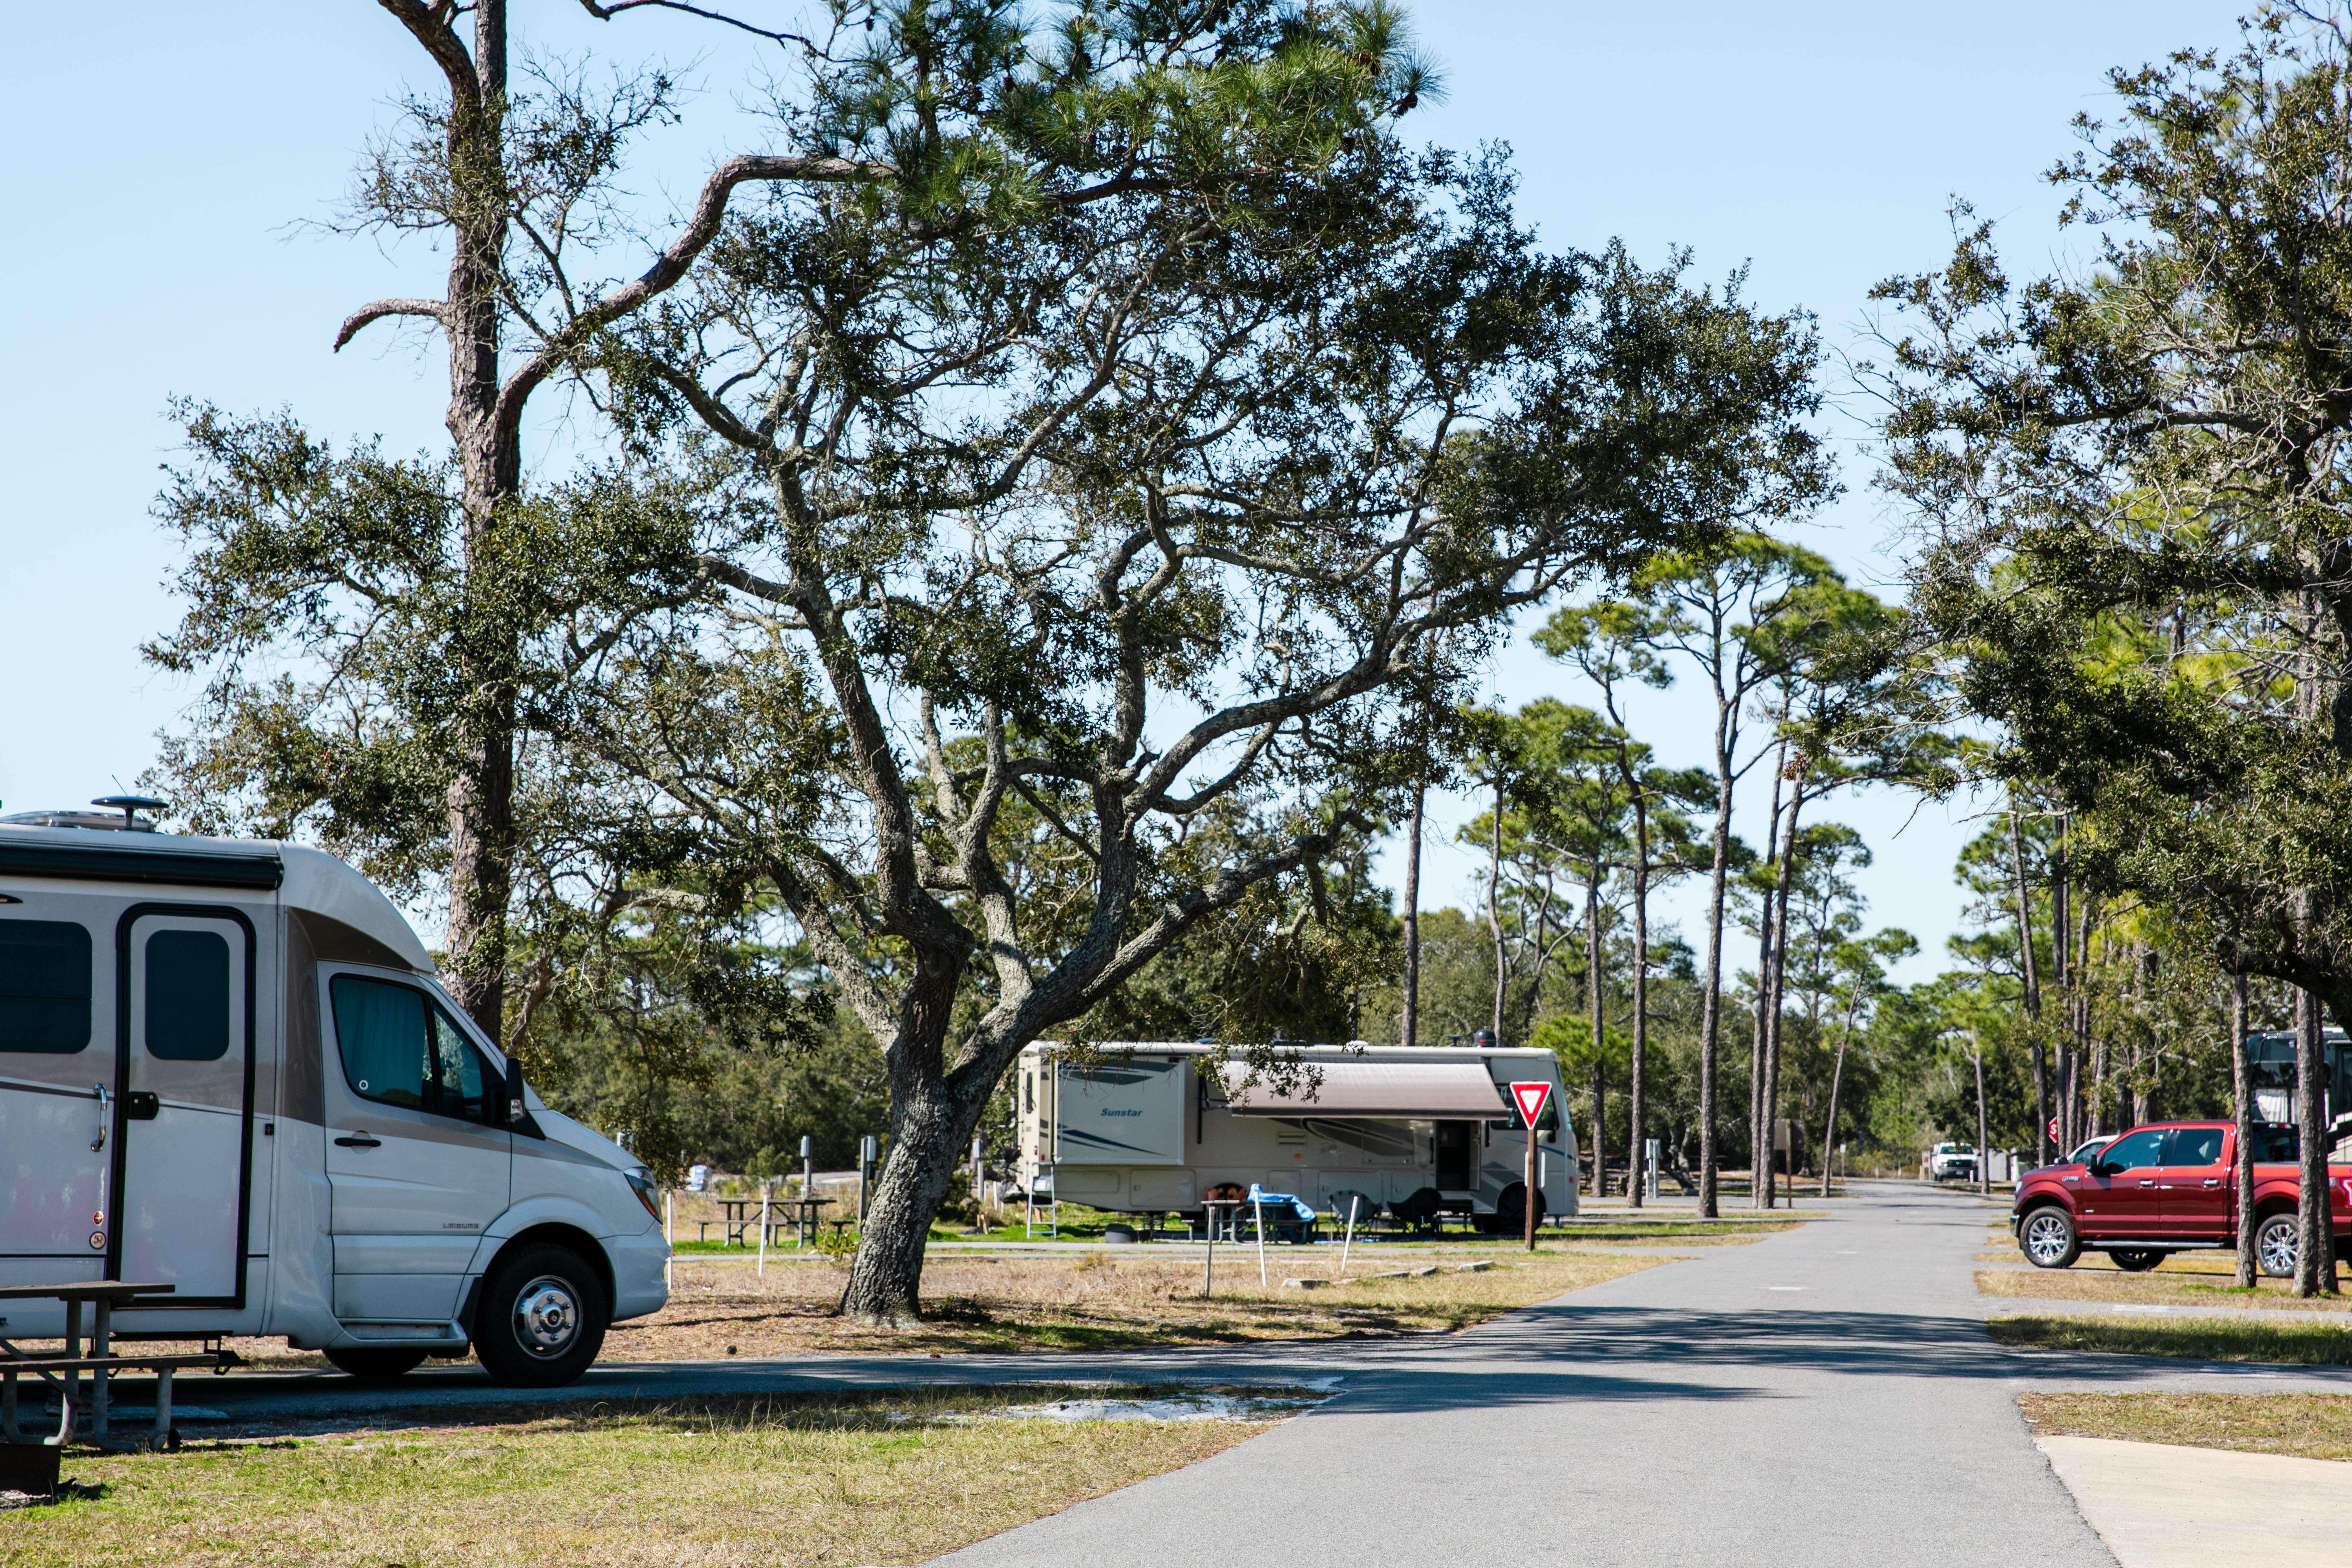 A road bisects a grassy campground with RVs and cars.